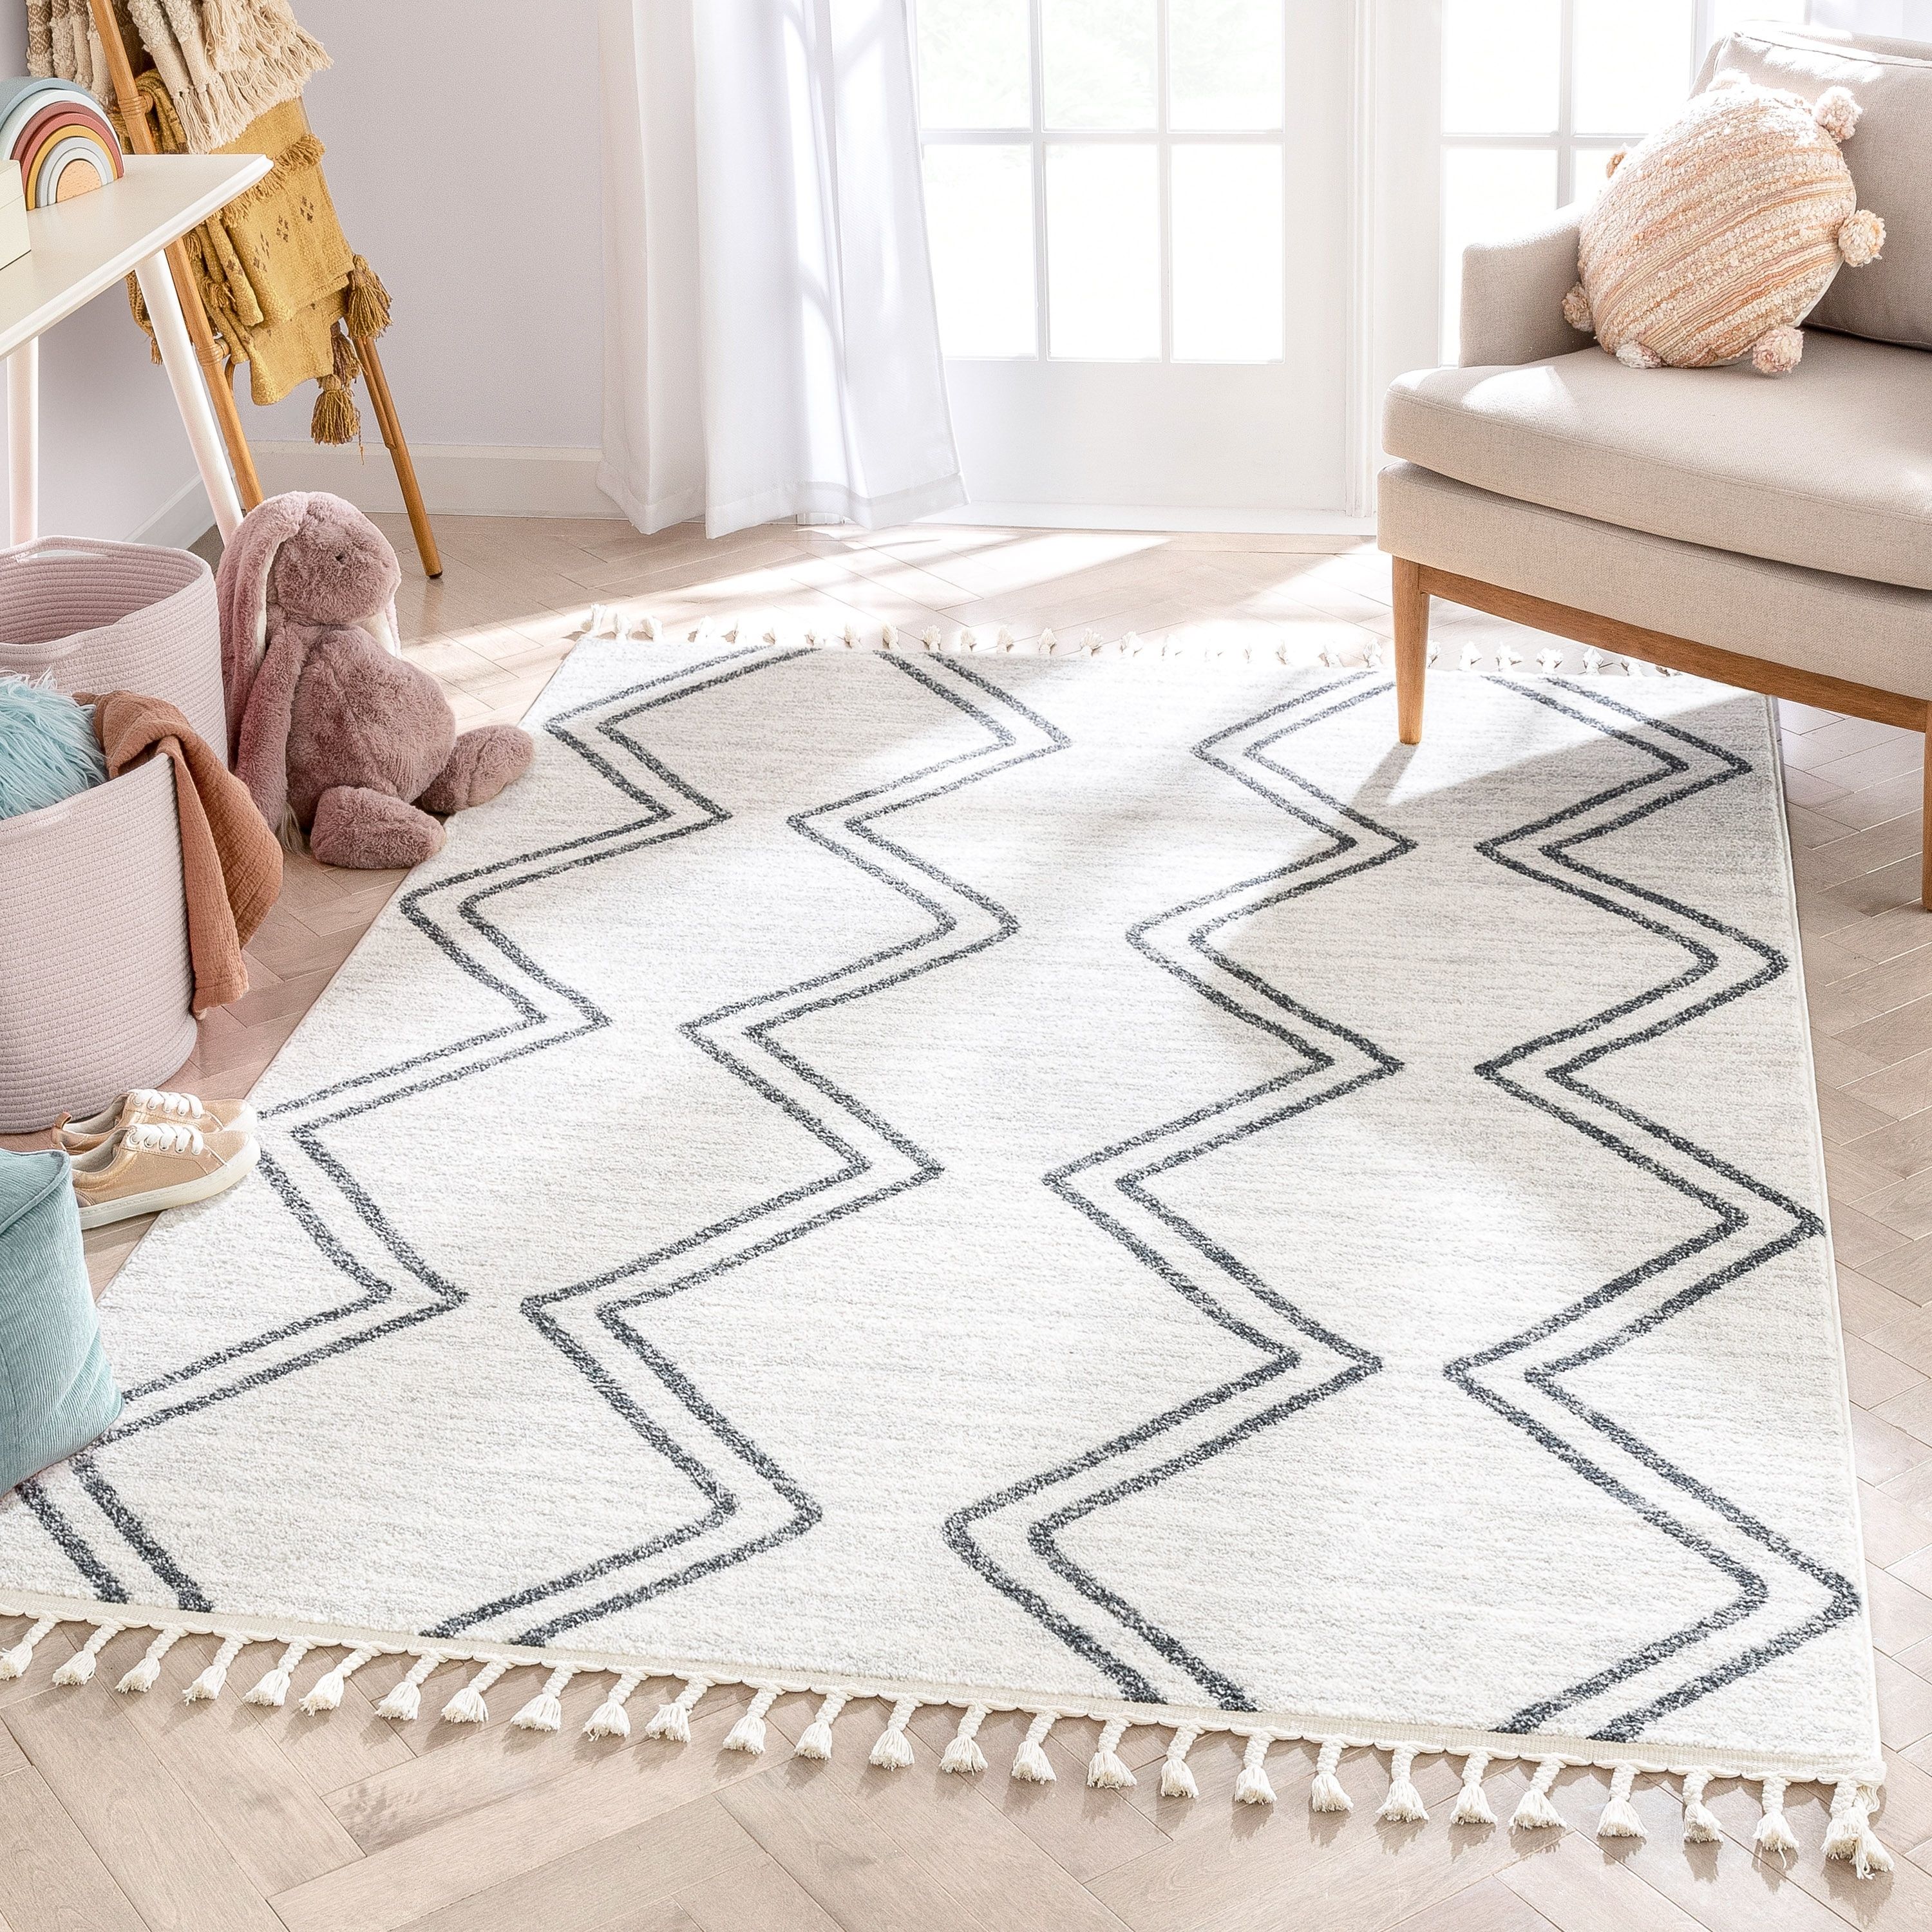 Well Woven Kennedy Reeve Modern Chevron Pattern Area Rug – On Sale –  Overstock – 35541471 Pertaining To Woven Chevron Rugs (View 5 of 15)